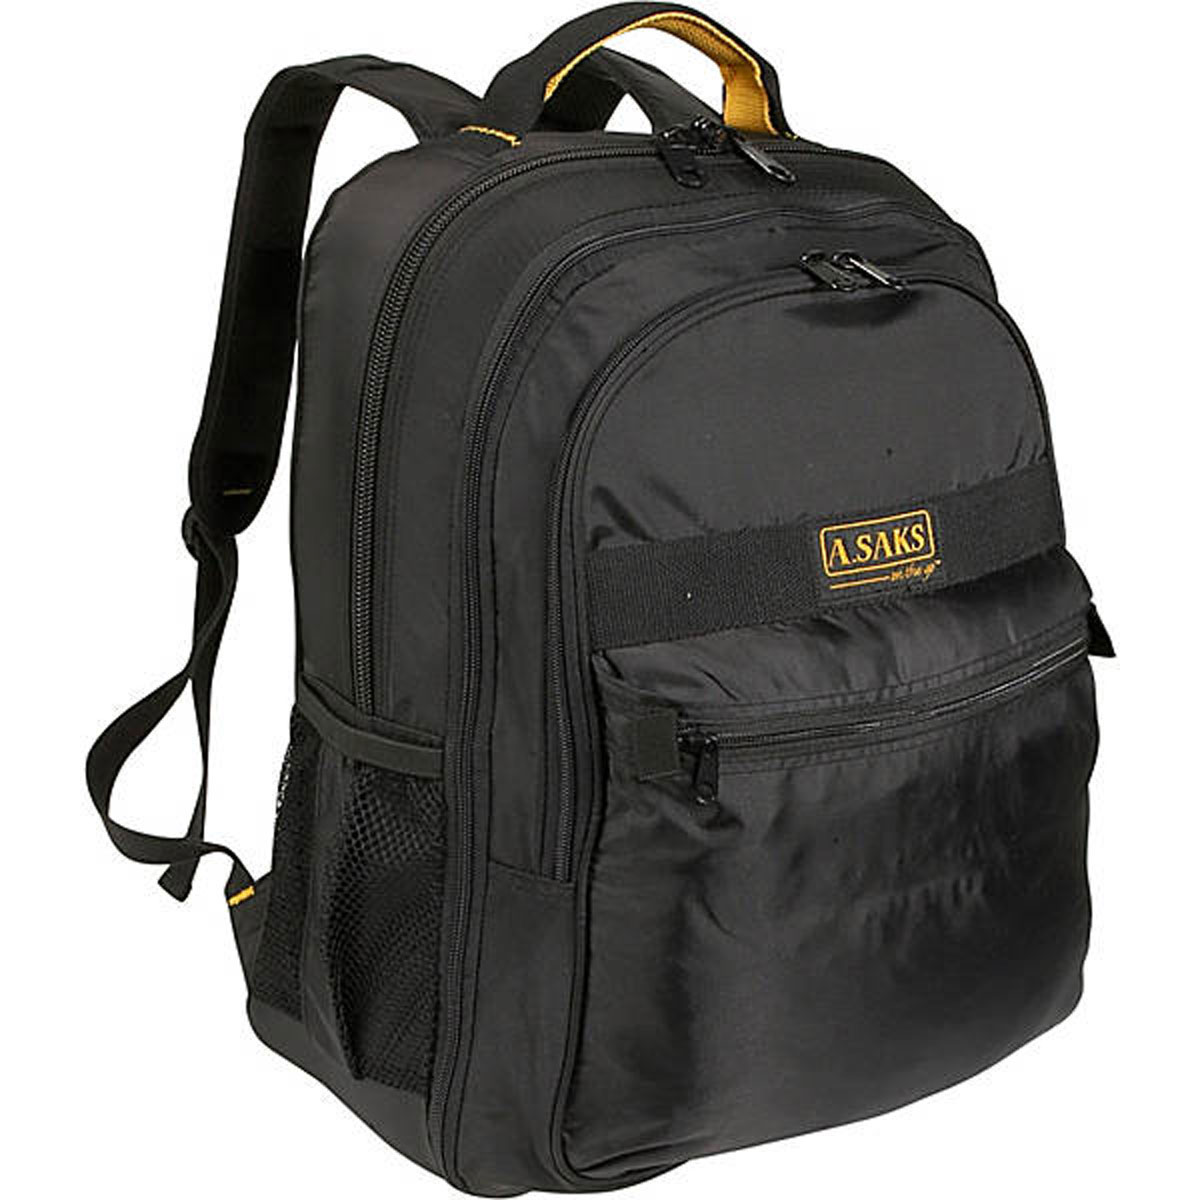 Ae-12 Expandable Lightweight Computer Backpack